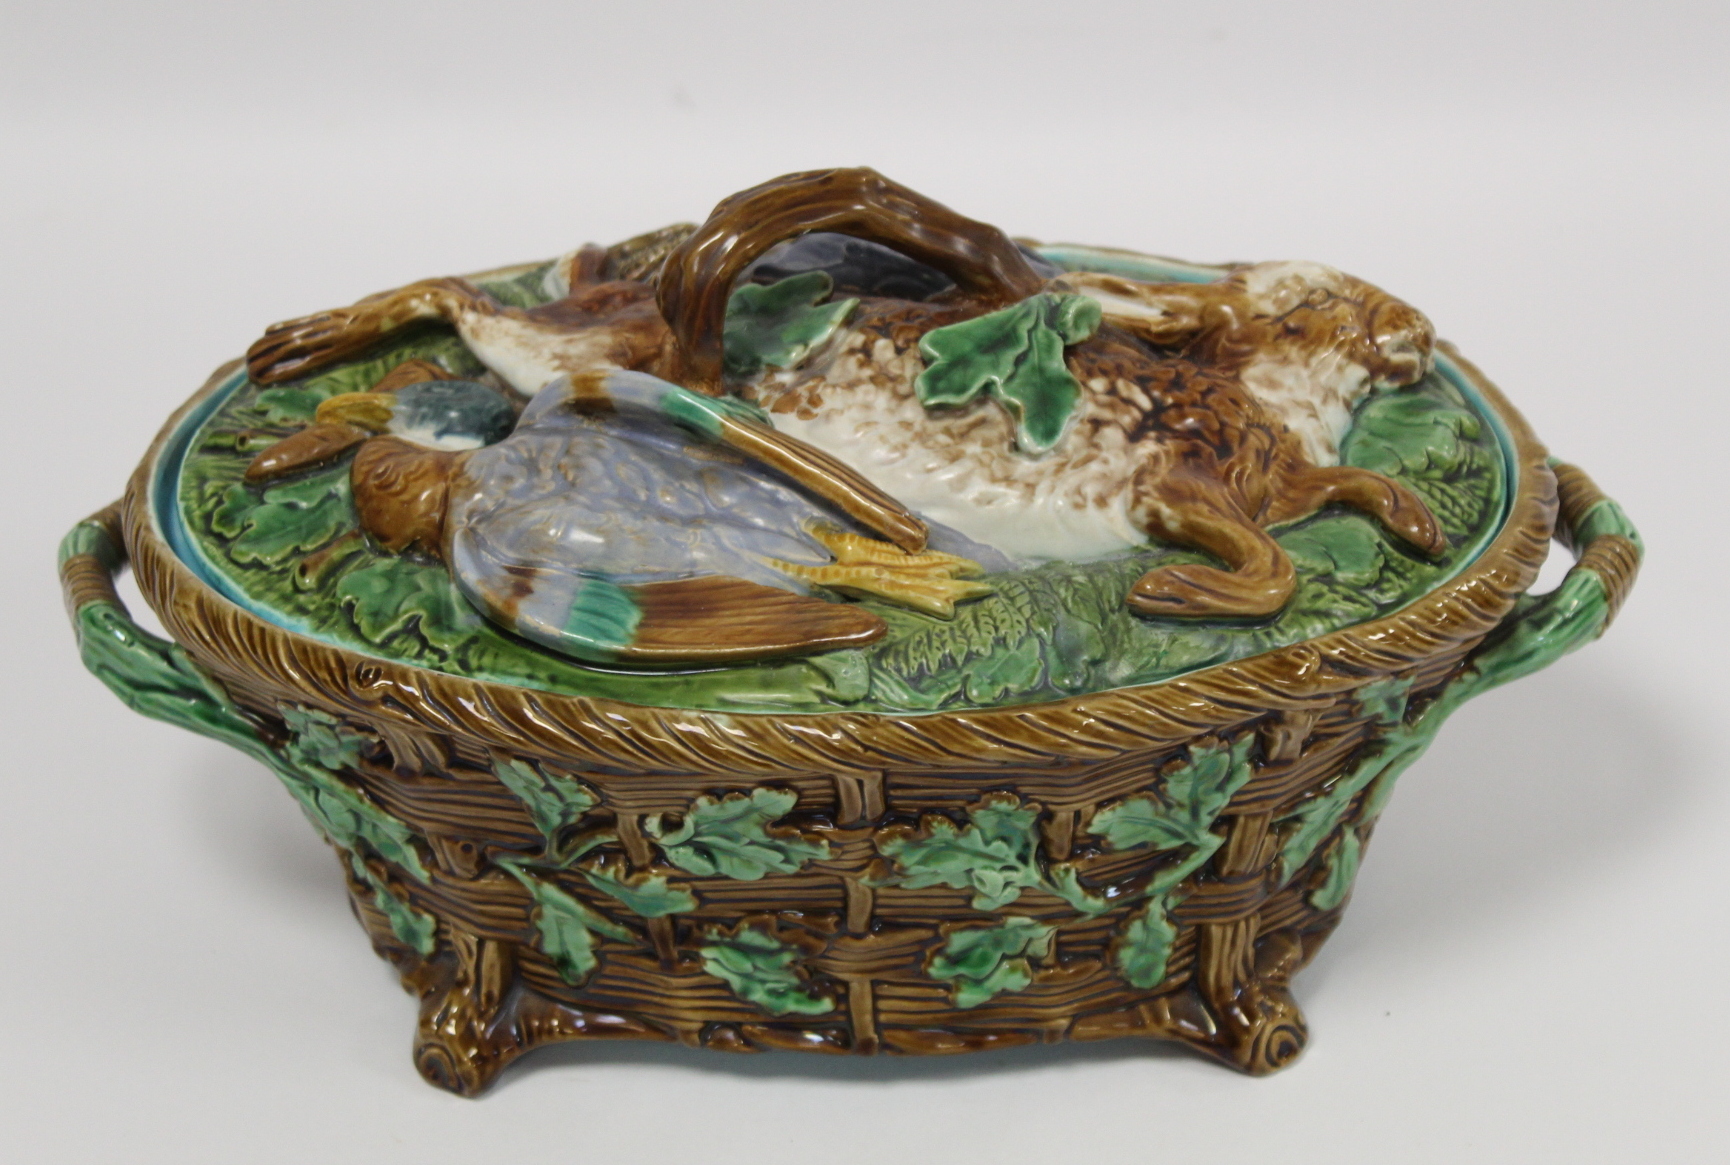 Victorian Minton majolica game pie tureen of twin handled oval form, the relief moulded naturalistic